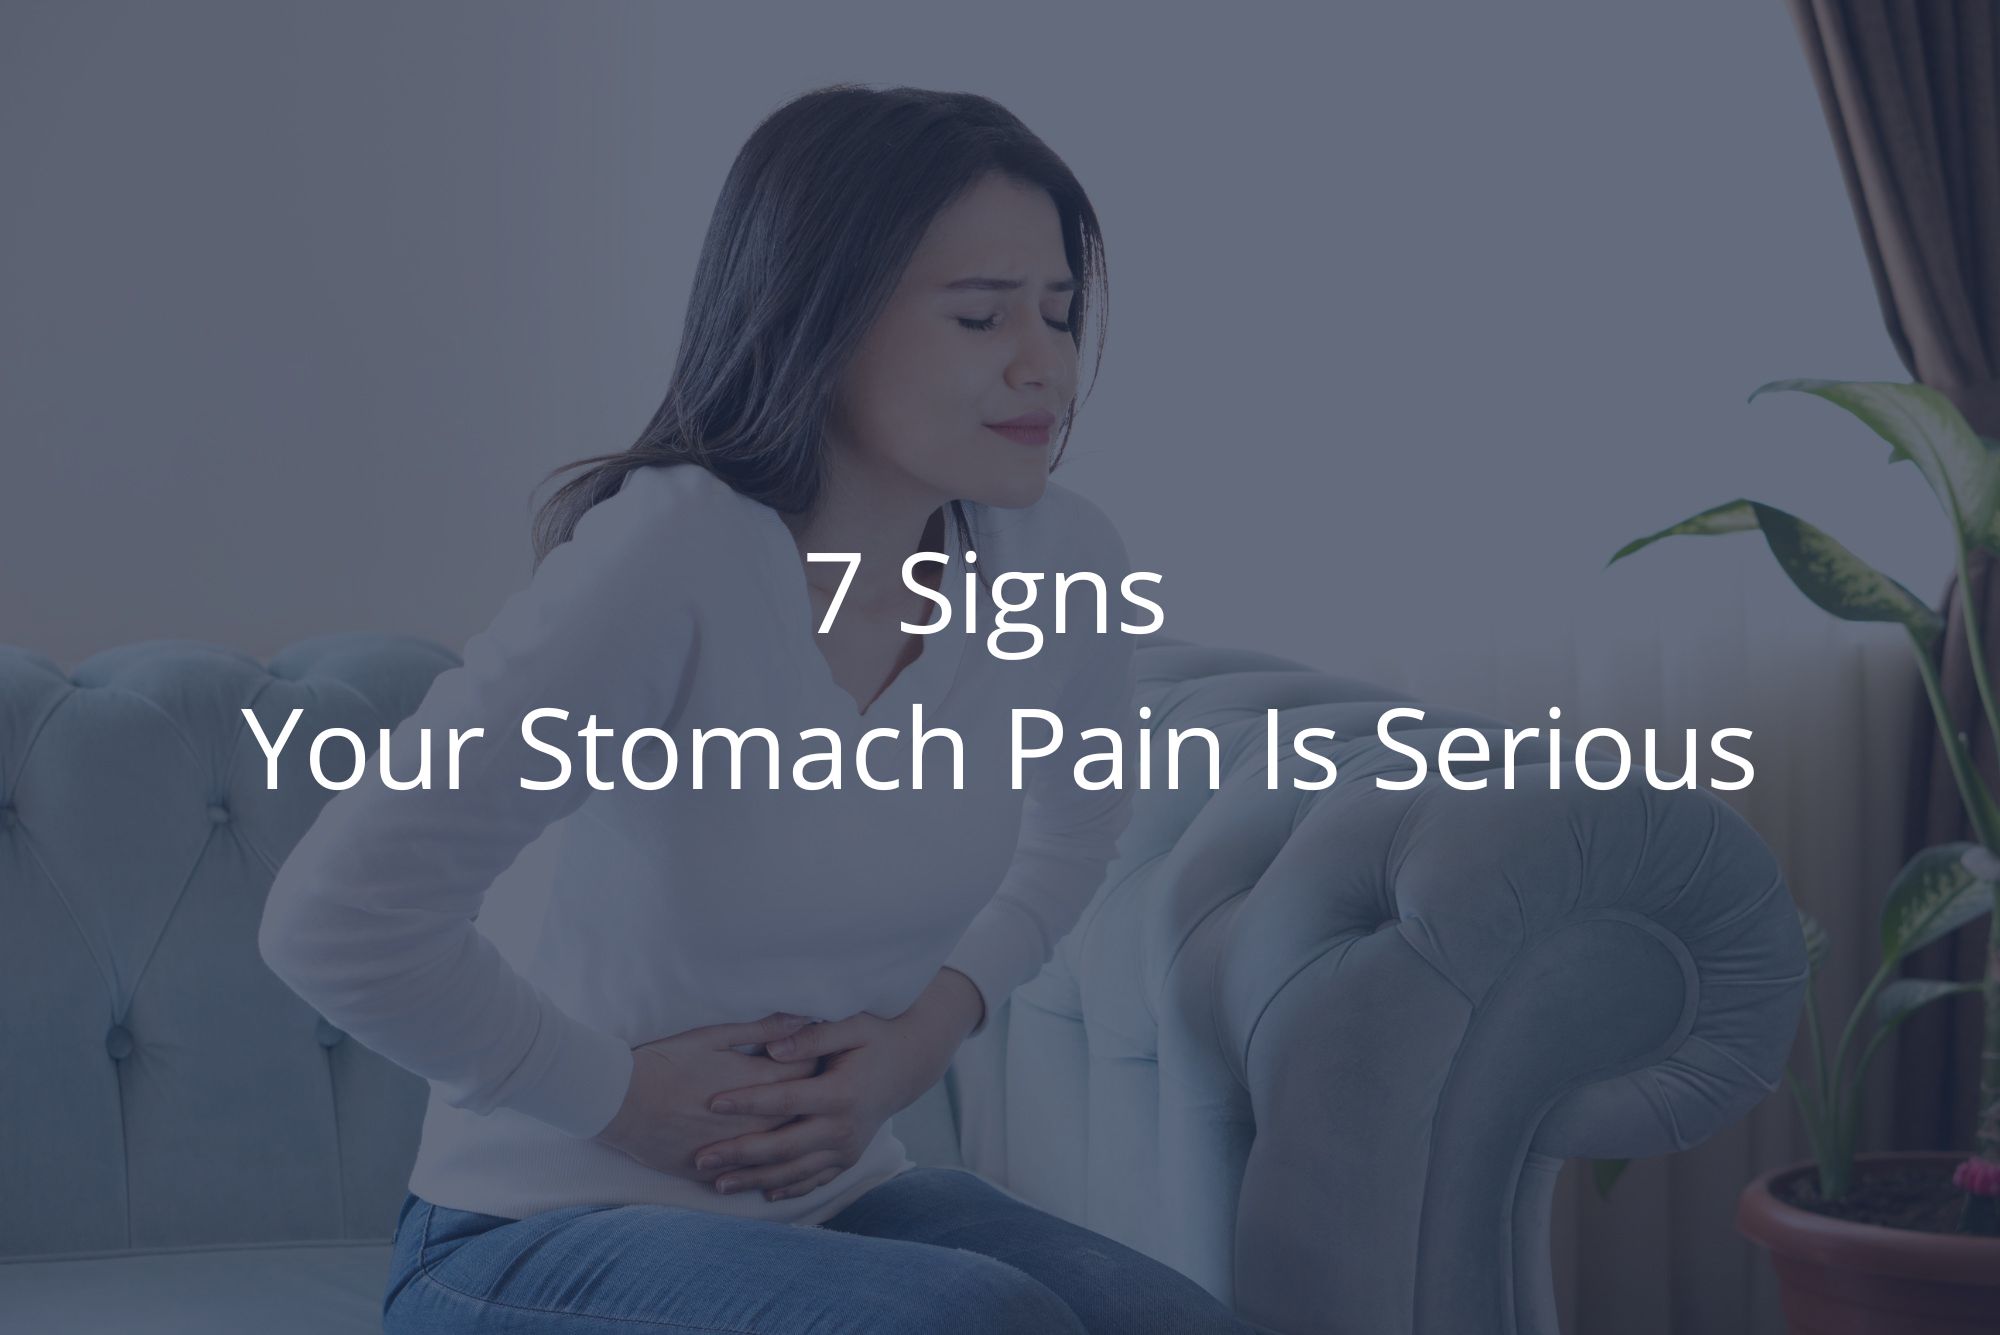 A woman is starting to recognize the signs that her stomach pain may be more serious than she previously thought with a dark overlay.